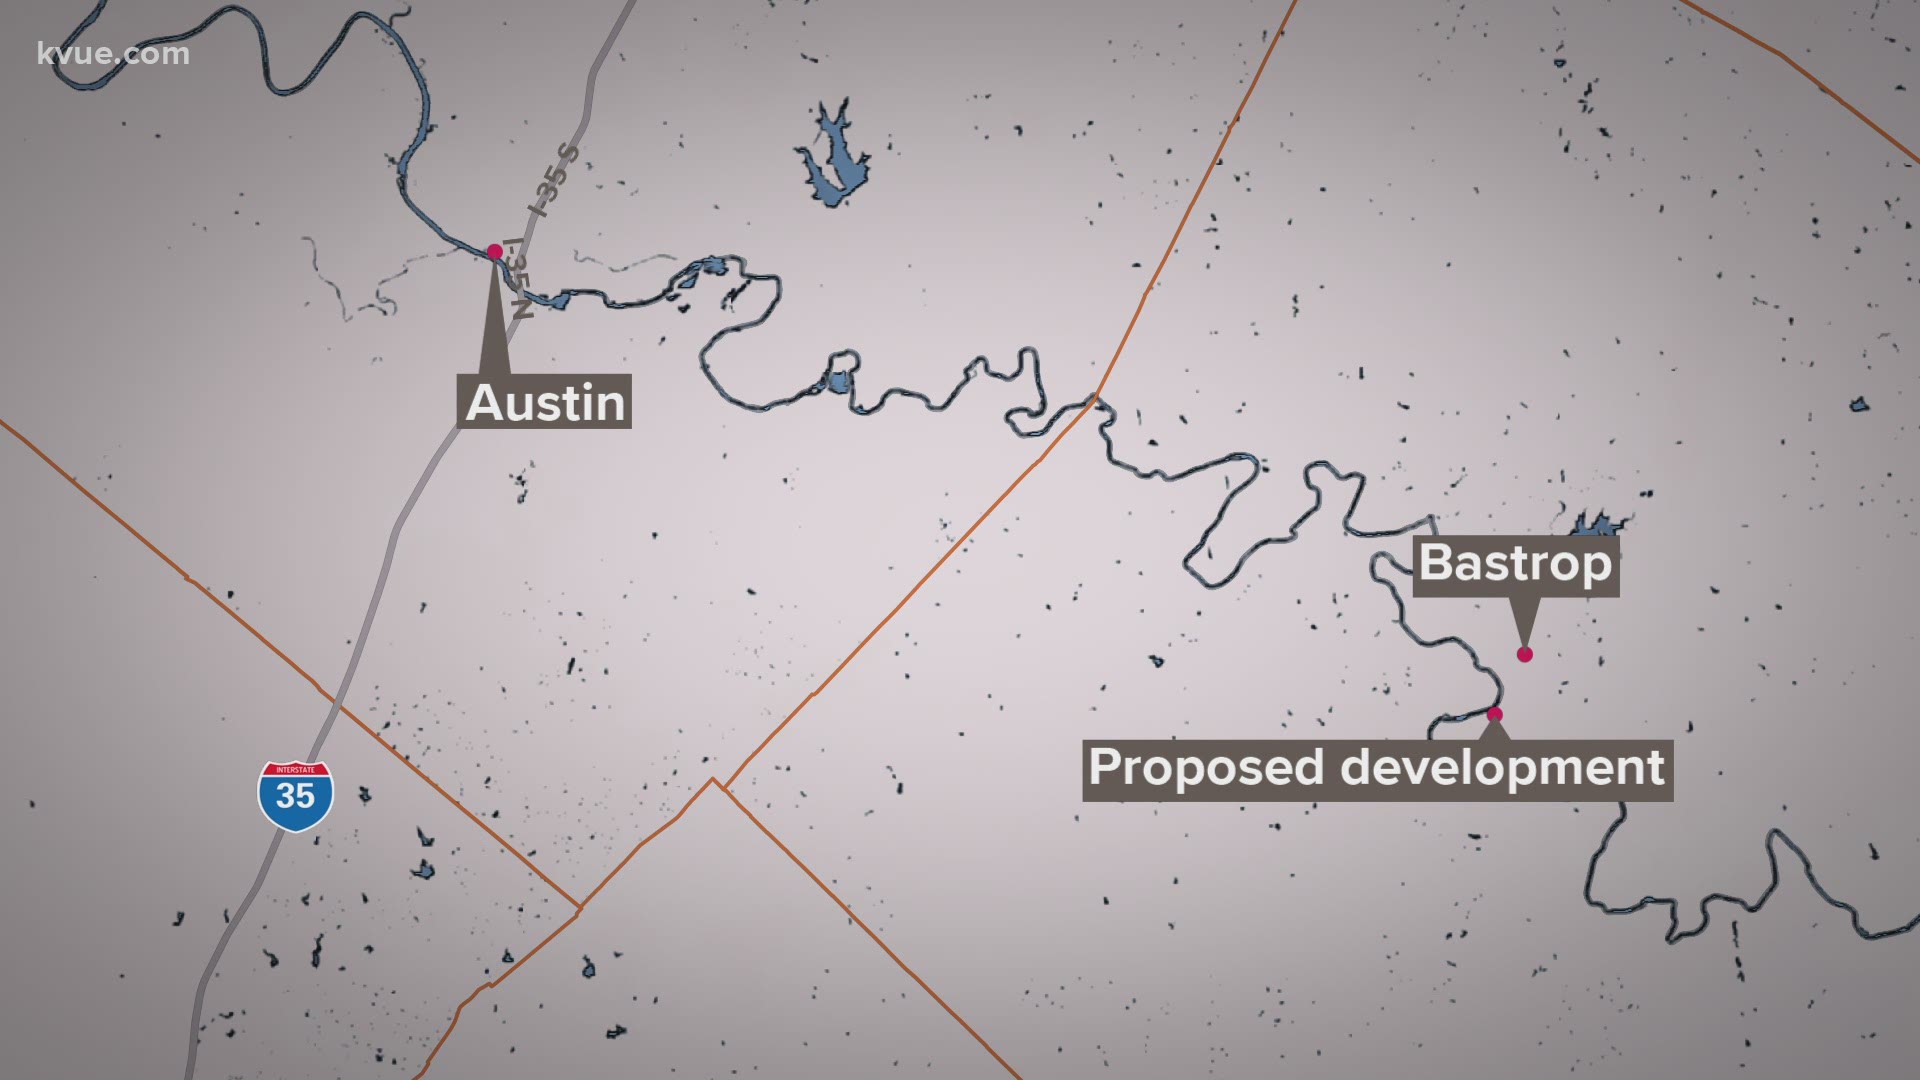 A California company is getting initial approval to bring a large film studio to Bastrop.